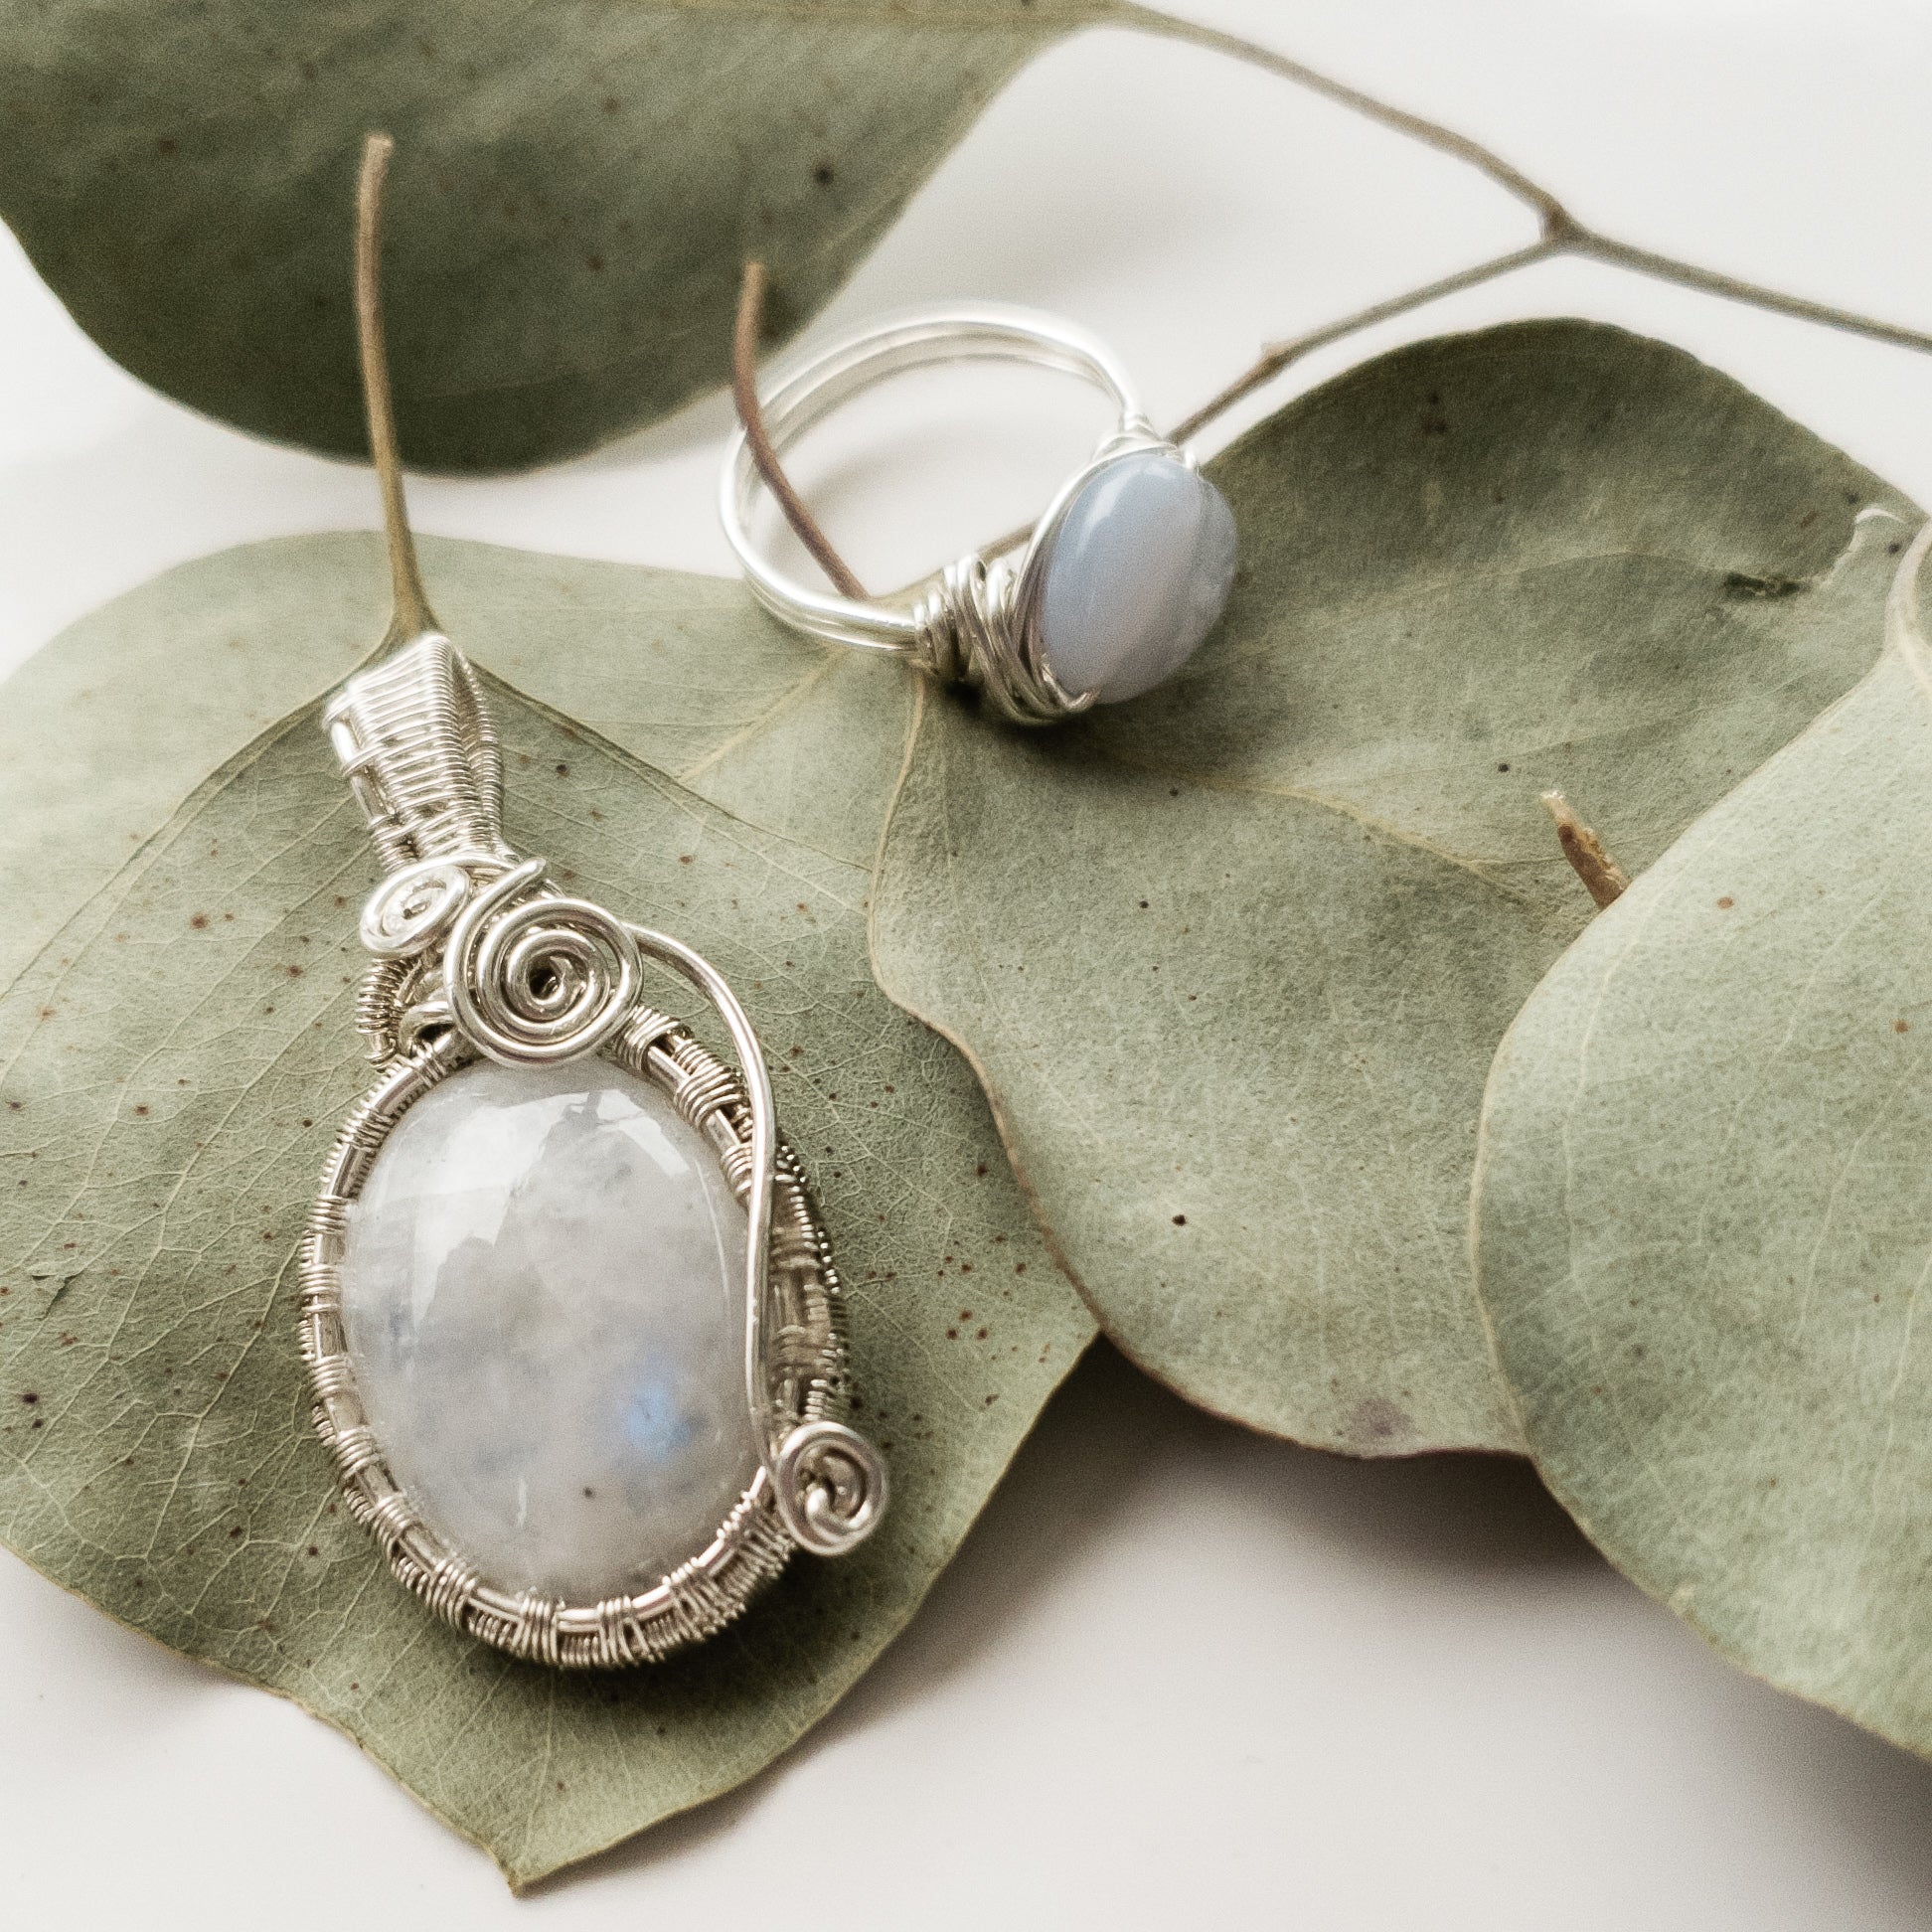 Celestial Collection - Beautiful Moonstone Pendant Necklace in Sterling Silver front view and Blue Lace Agate ring in Sterling Silver sold separately - BellaChel Jeweler